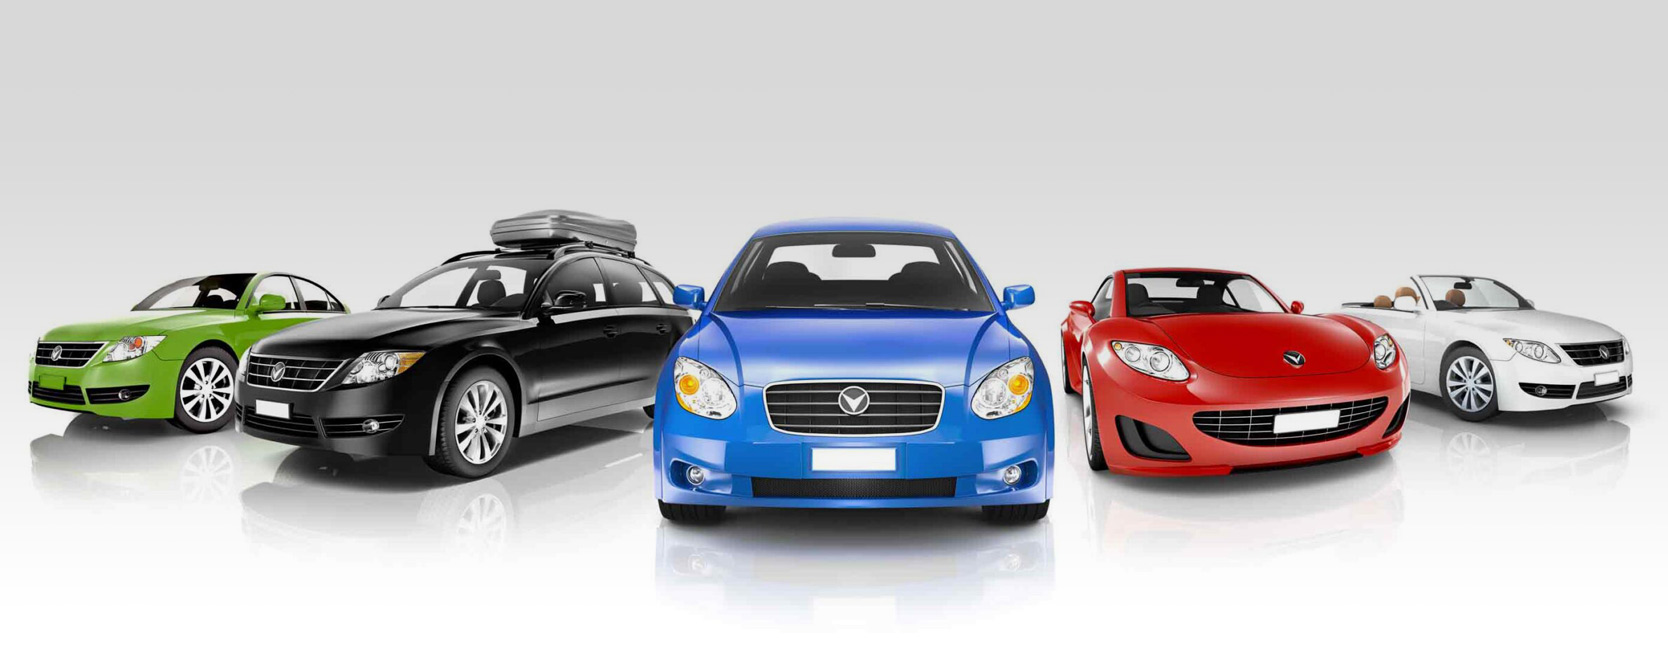 Get prequalified for an auto loan